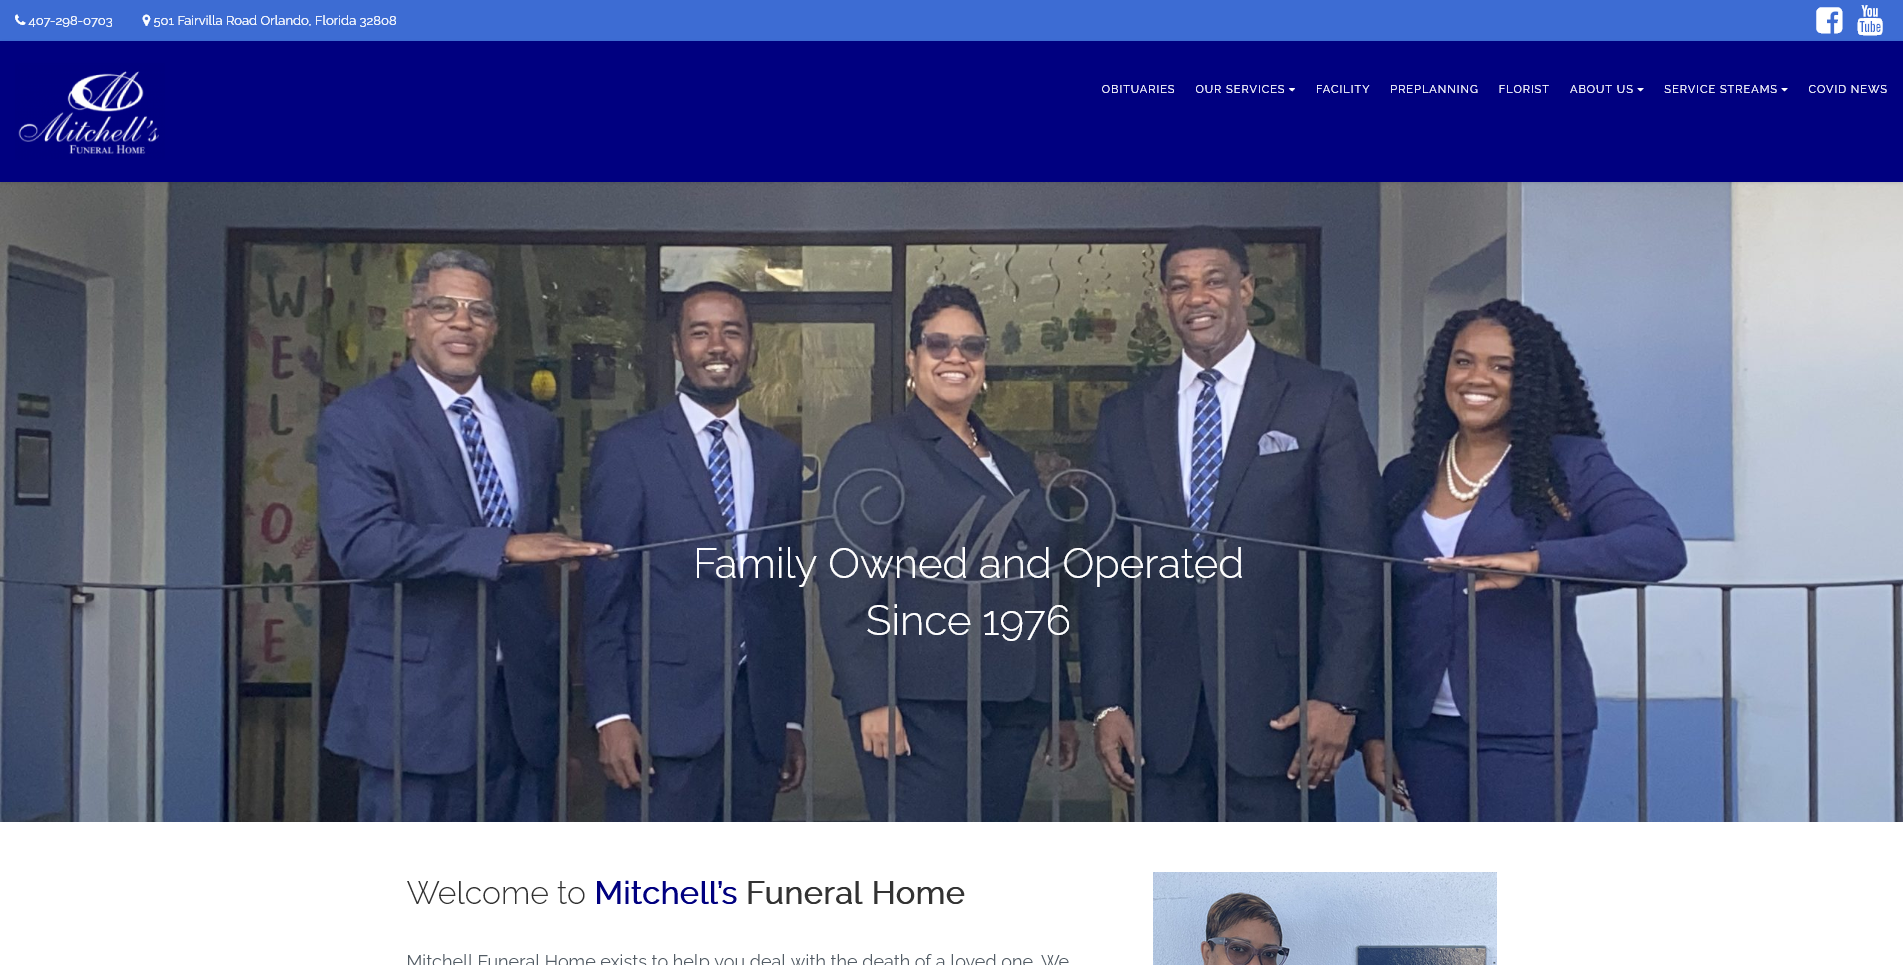 Mitchell's Funeral Home – Family Owned and Operated Since 1976